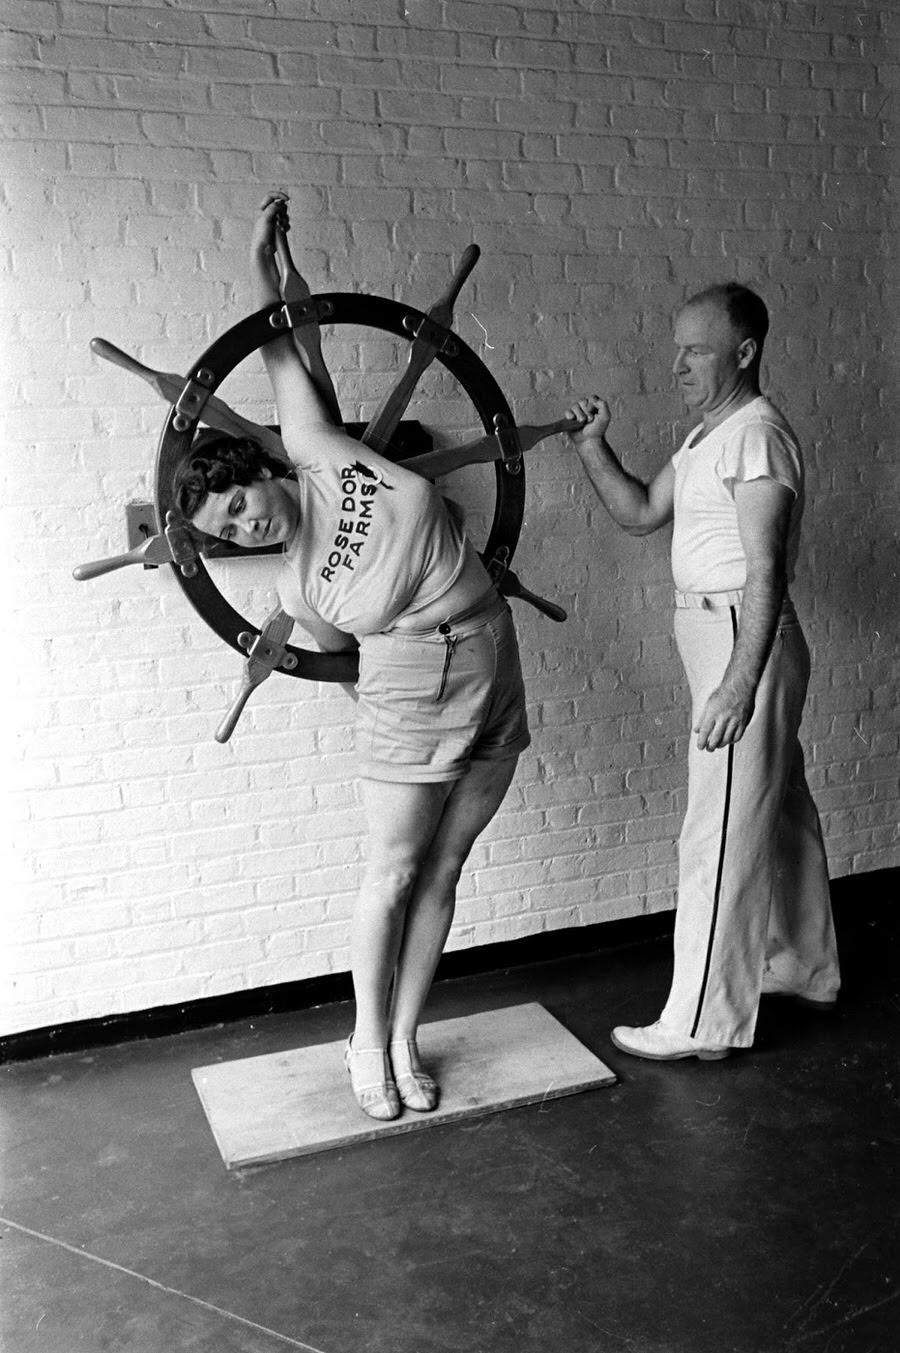 Exercise and stretching include use of a ship's steering wheel.